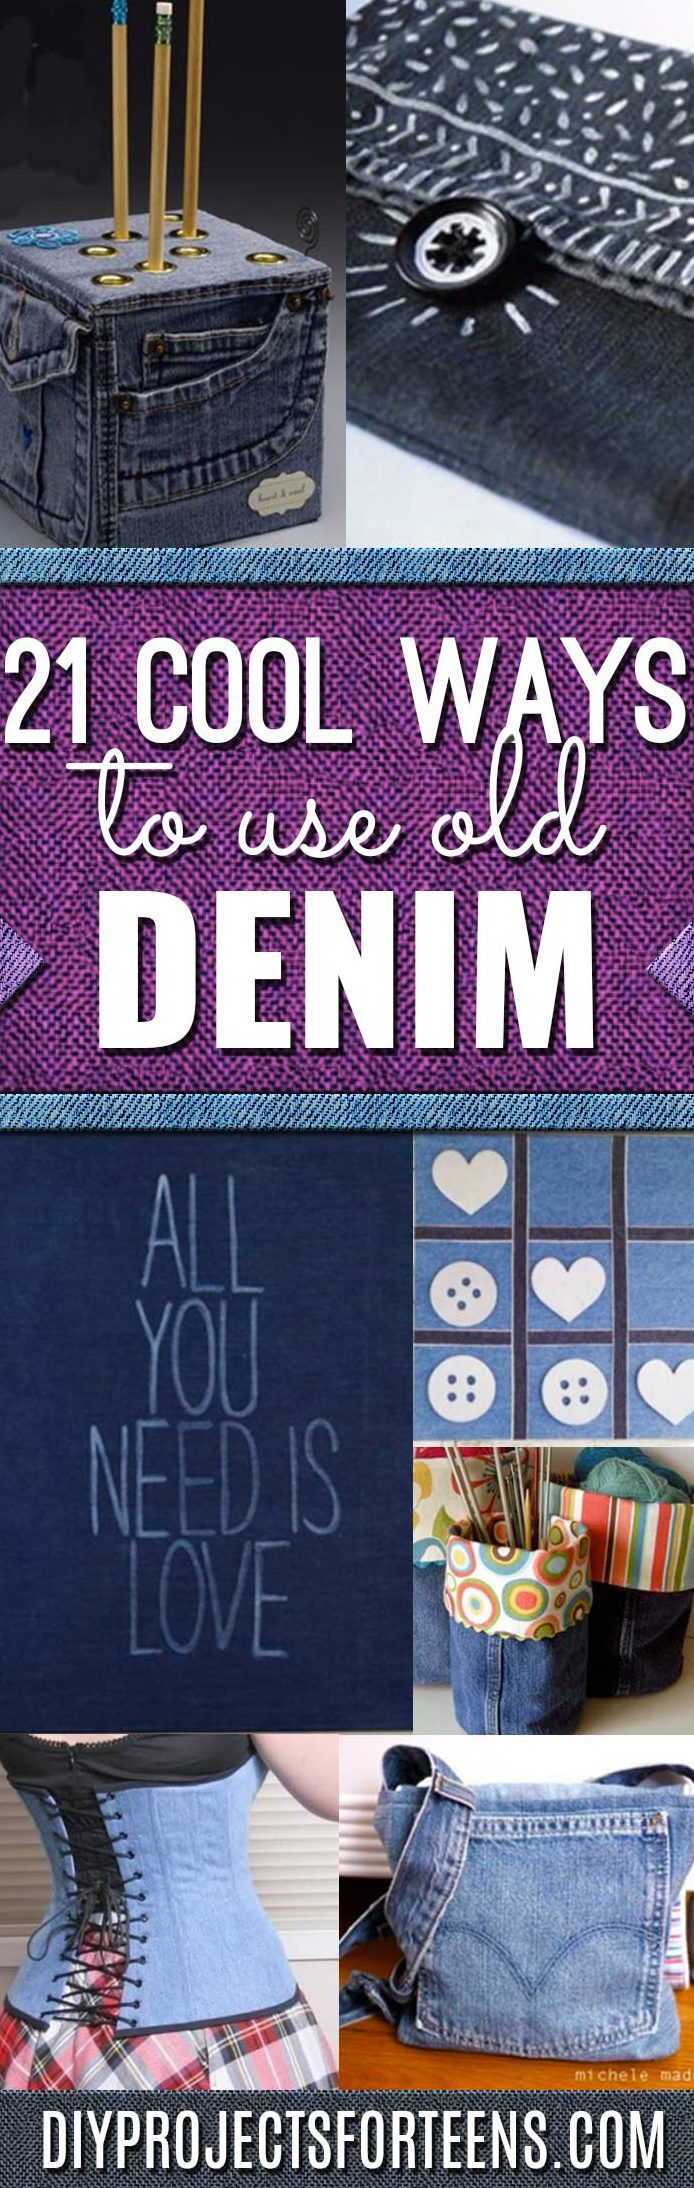 DIY Crafts with Old Denim Jeans - Cool Projects and Fashion You Can Make With Old Jeans - Fun Crafts for Teens and Adults, Inexpensive Ones!